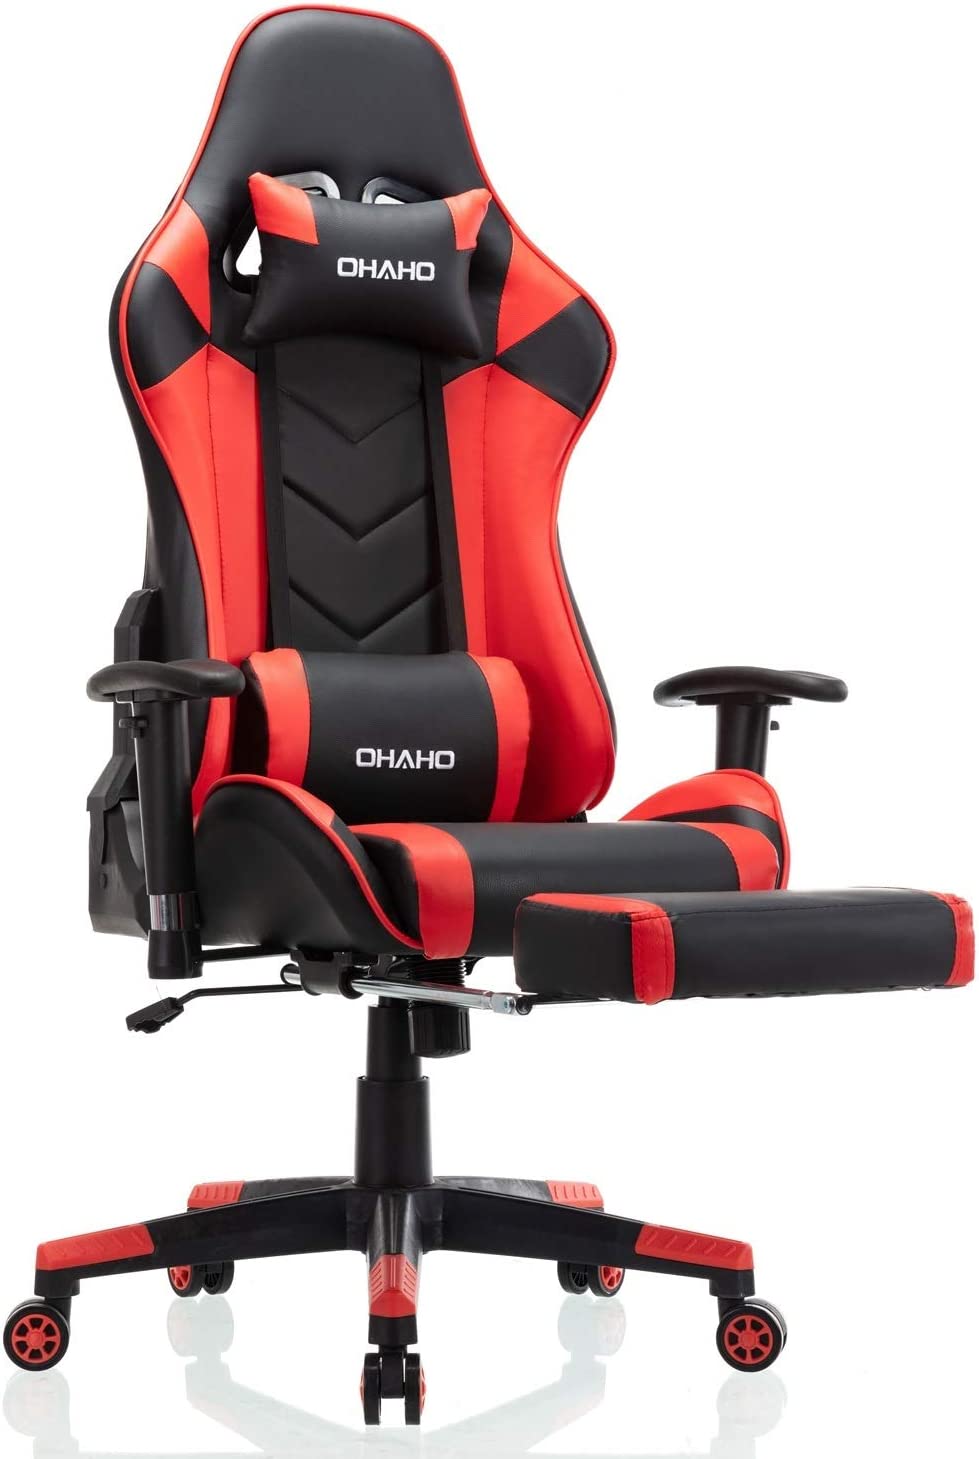 OHAHO Gaming Chair Racing Style Office Chair Adjustable Massage Lumbar Cushion Swivel Rocker Recliner Leather High Back Ergonomic Computer Desk Chair